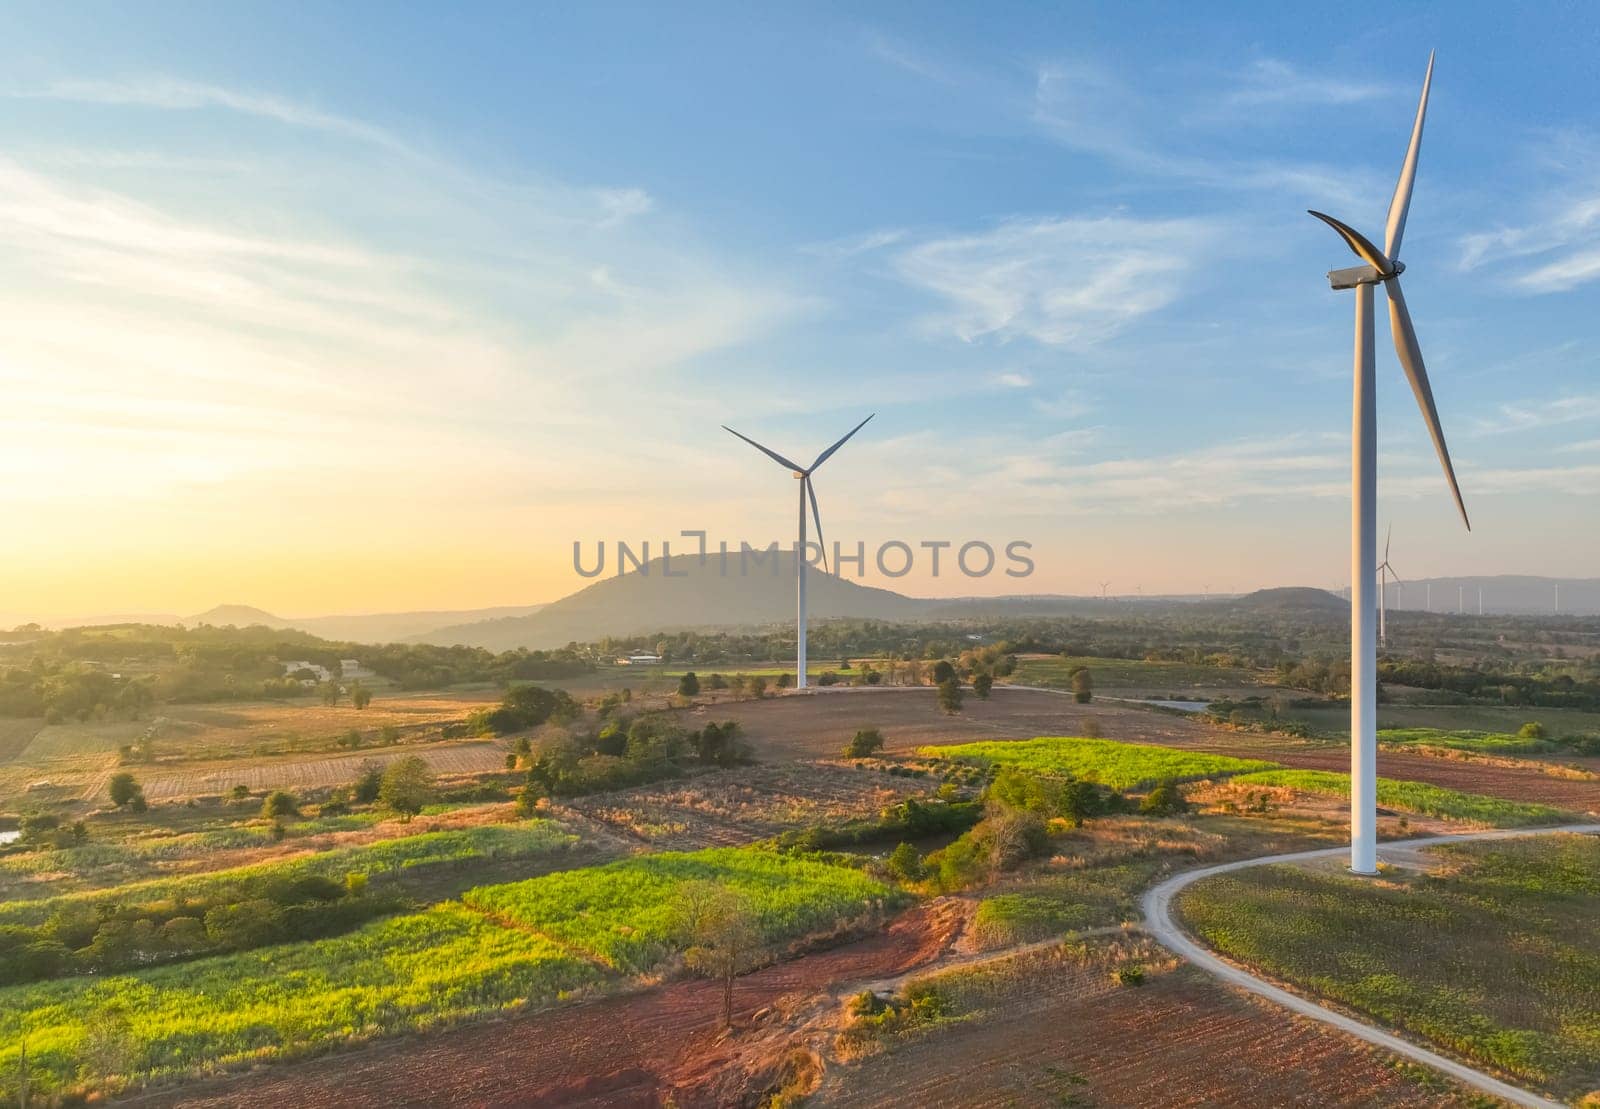 Wind farm field and sunset sky. Wind power. Sustainable, renewable energy. Wind turbines generate electricity. Sustainable development. Green technology for energy sustainability. Eco-friendly energy. by Fahroni